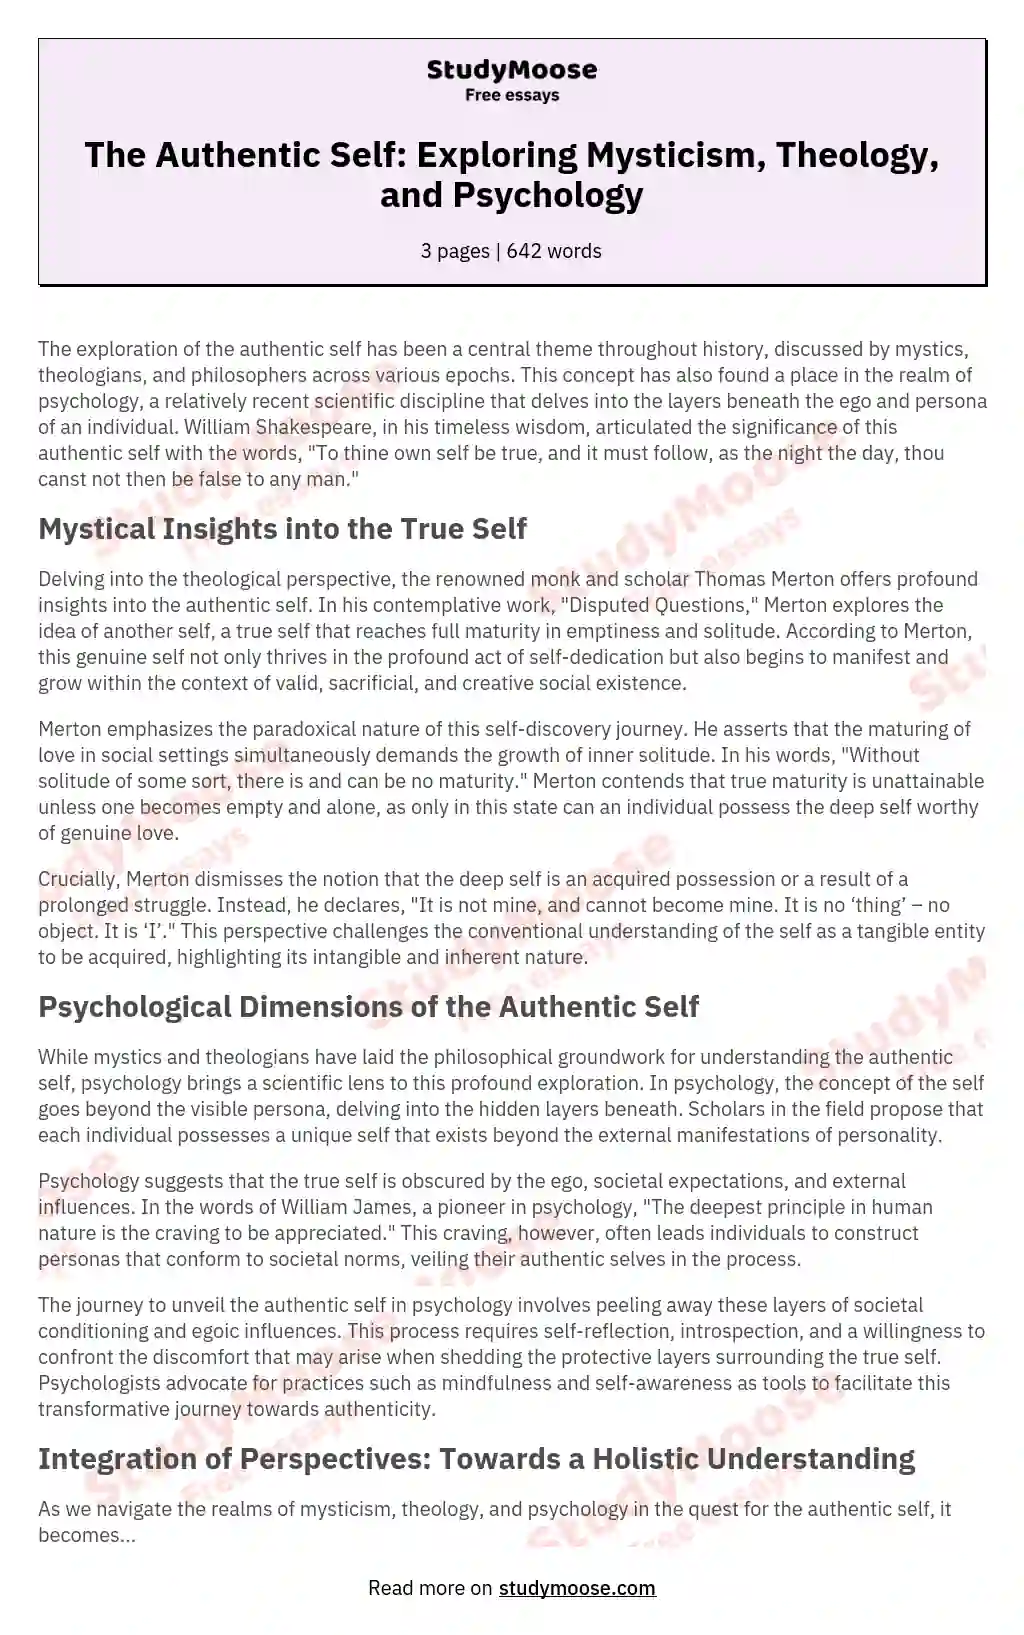 The Authentic Self: Exploring Mysticism, Theology, and Psychology essay